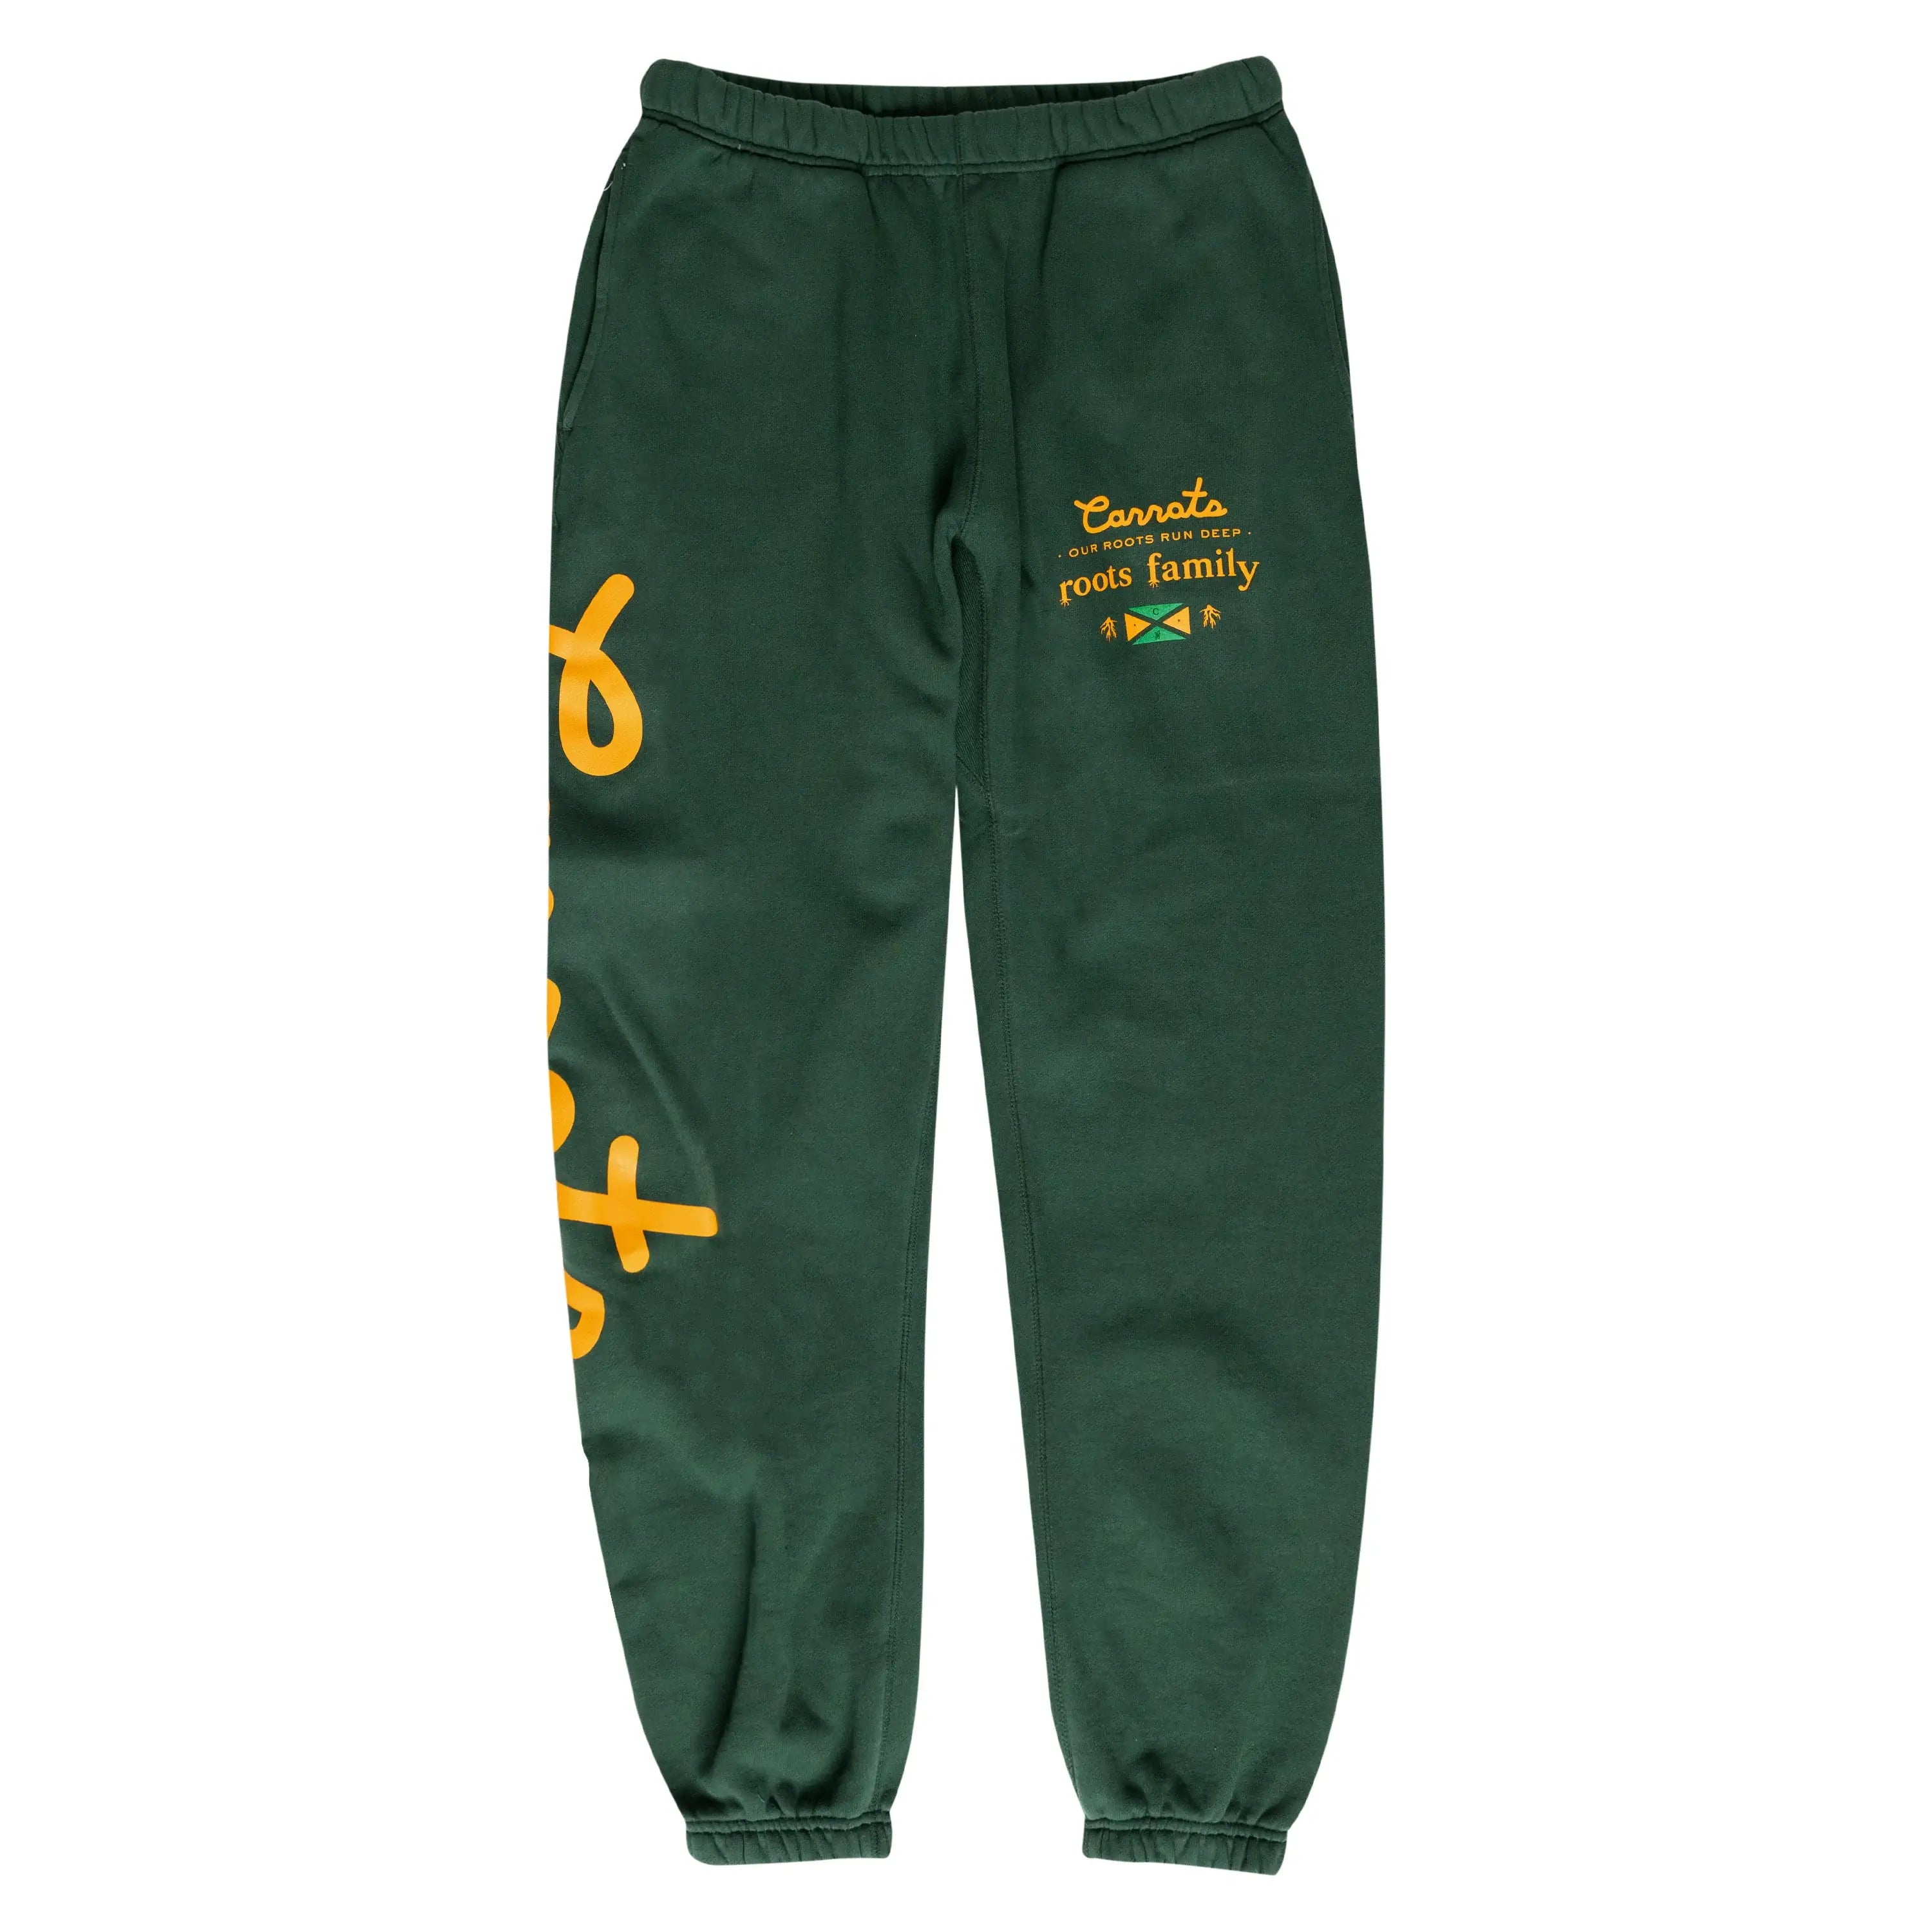 Carrots ROOTS FAMILY SWEATPANTS - Forest Green